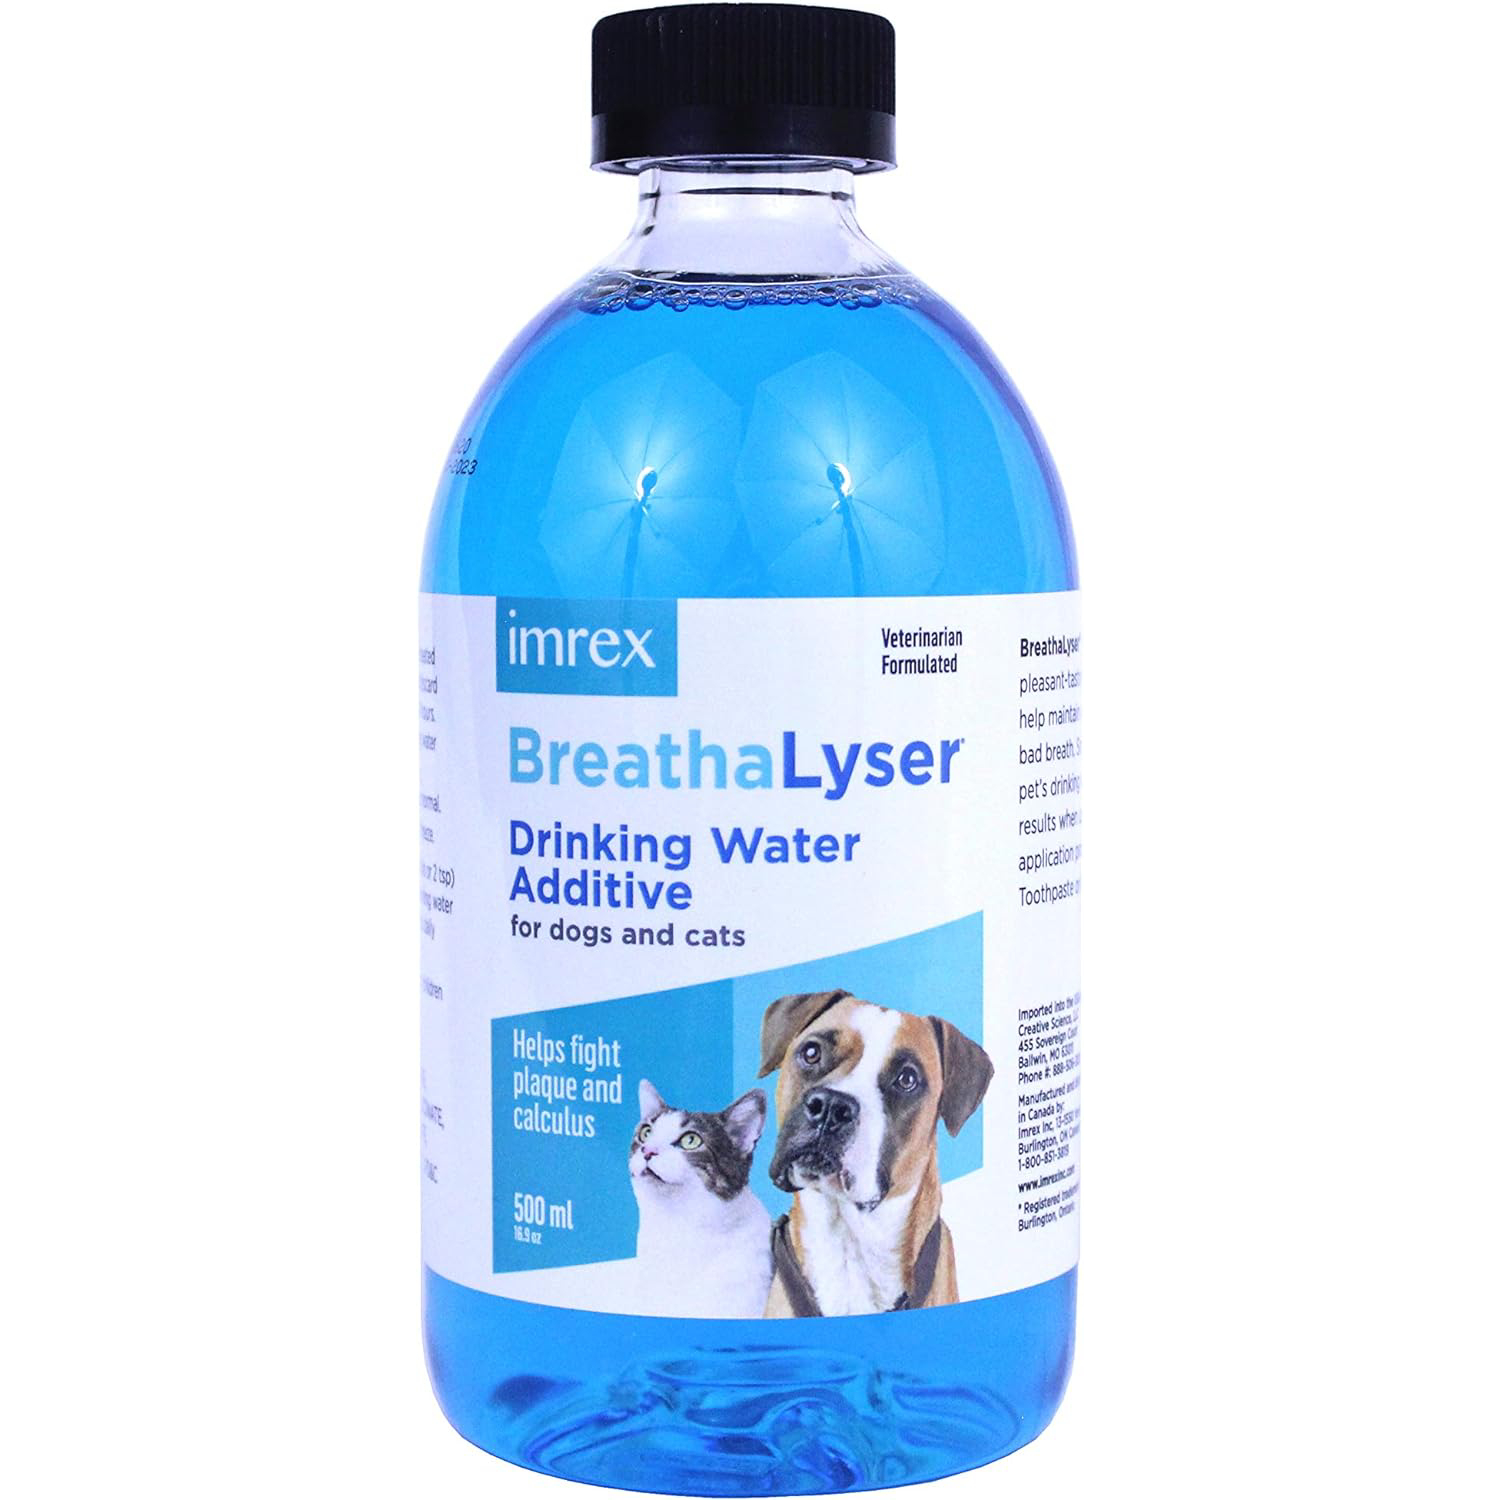 New Project BREATHALYSER imrex Pet Breath Freshener and Dental Care Water Additive for Dogs and Cats